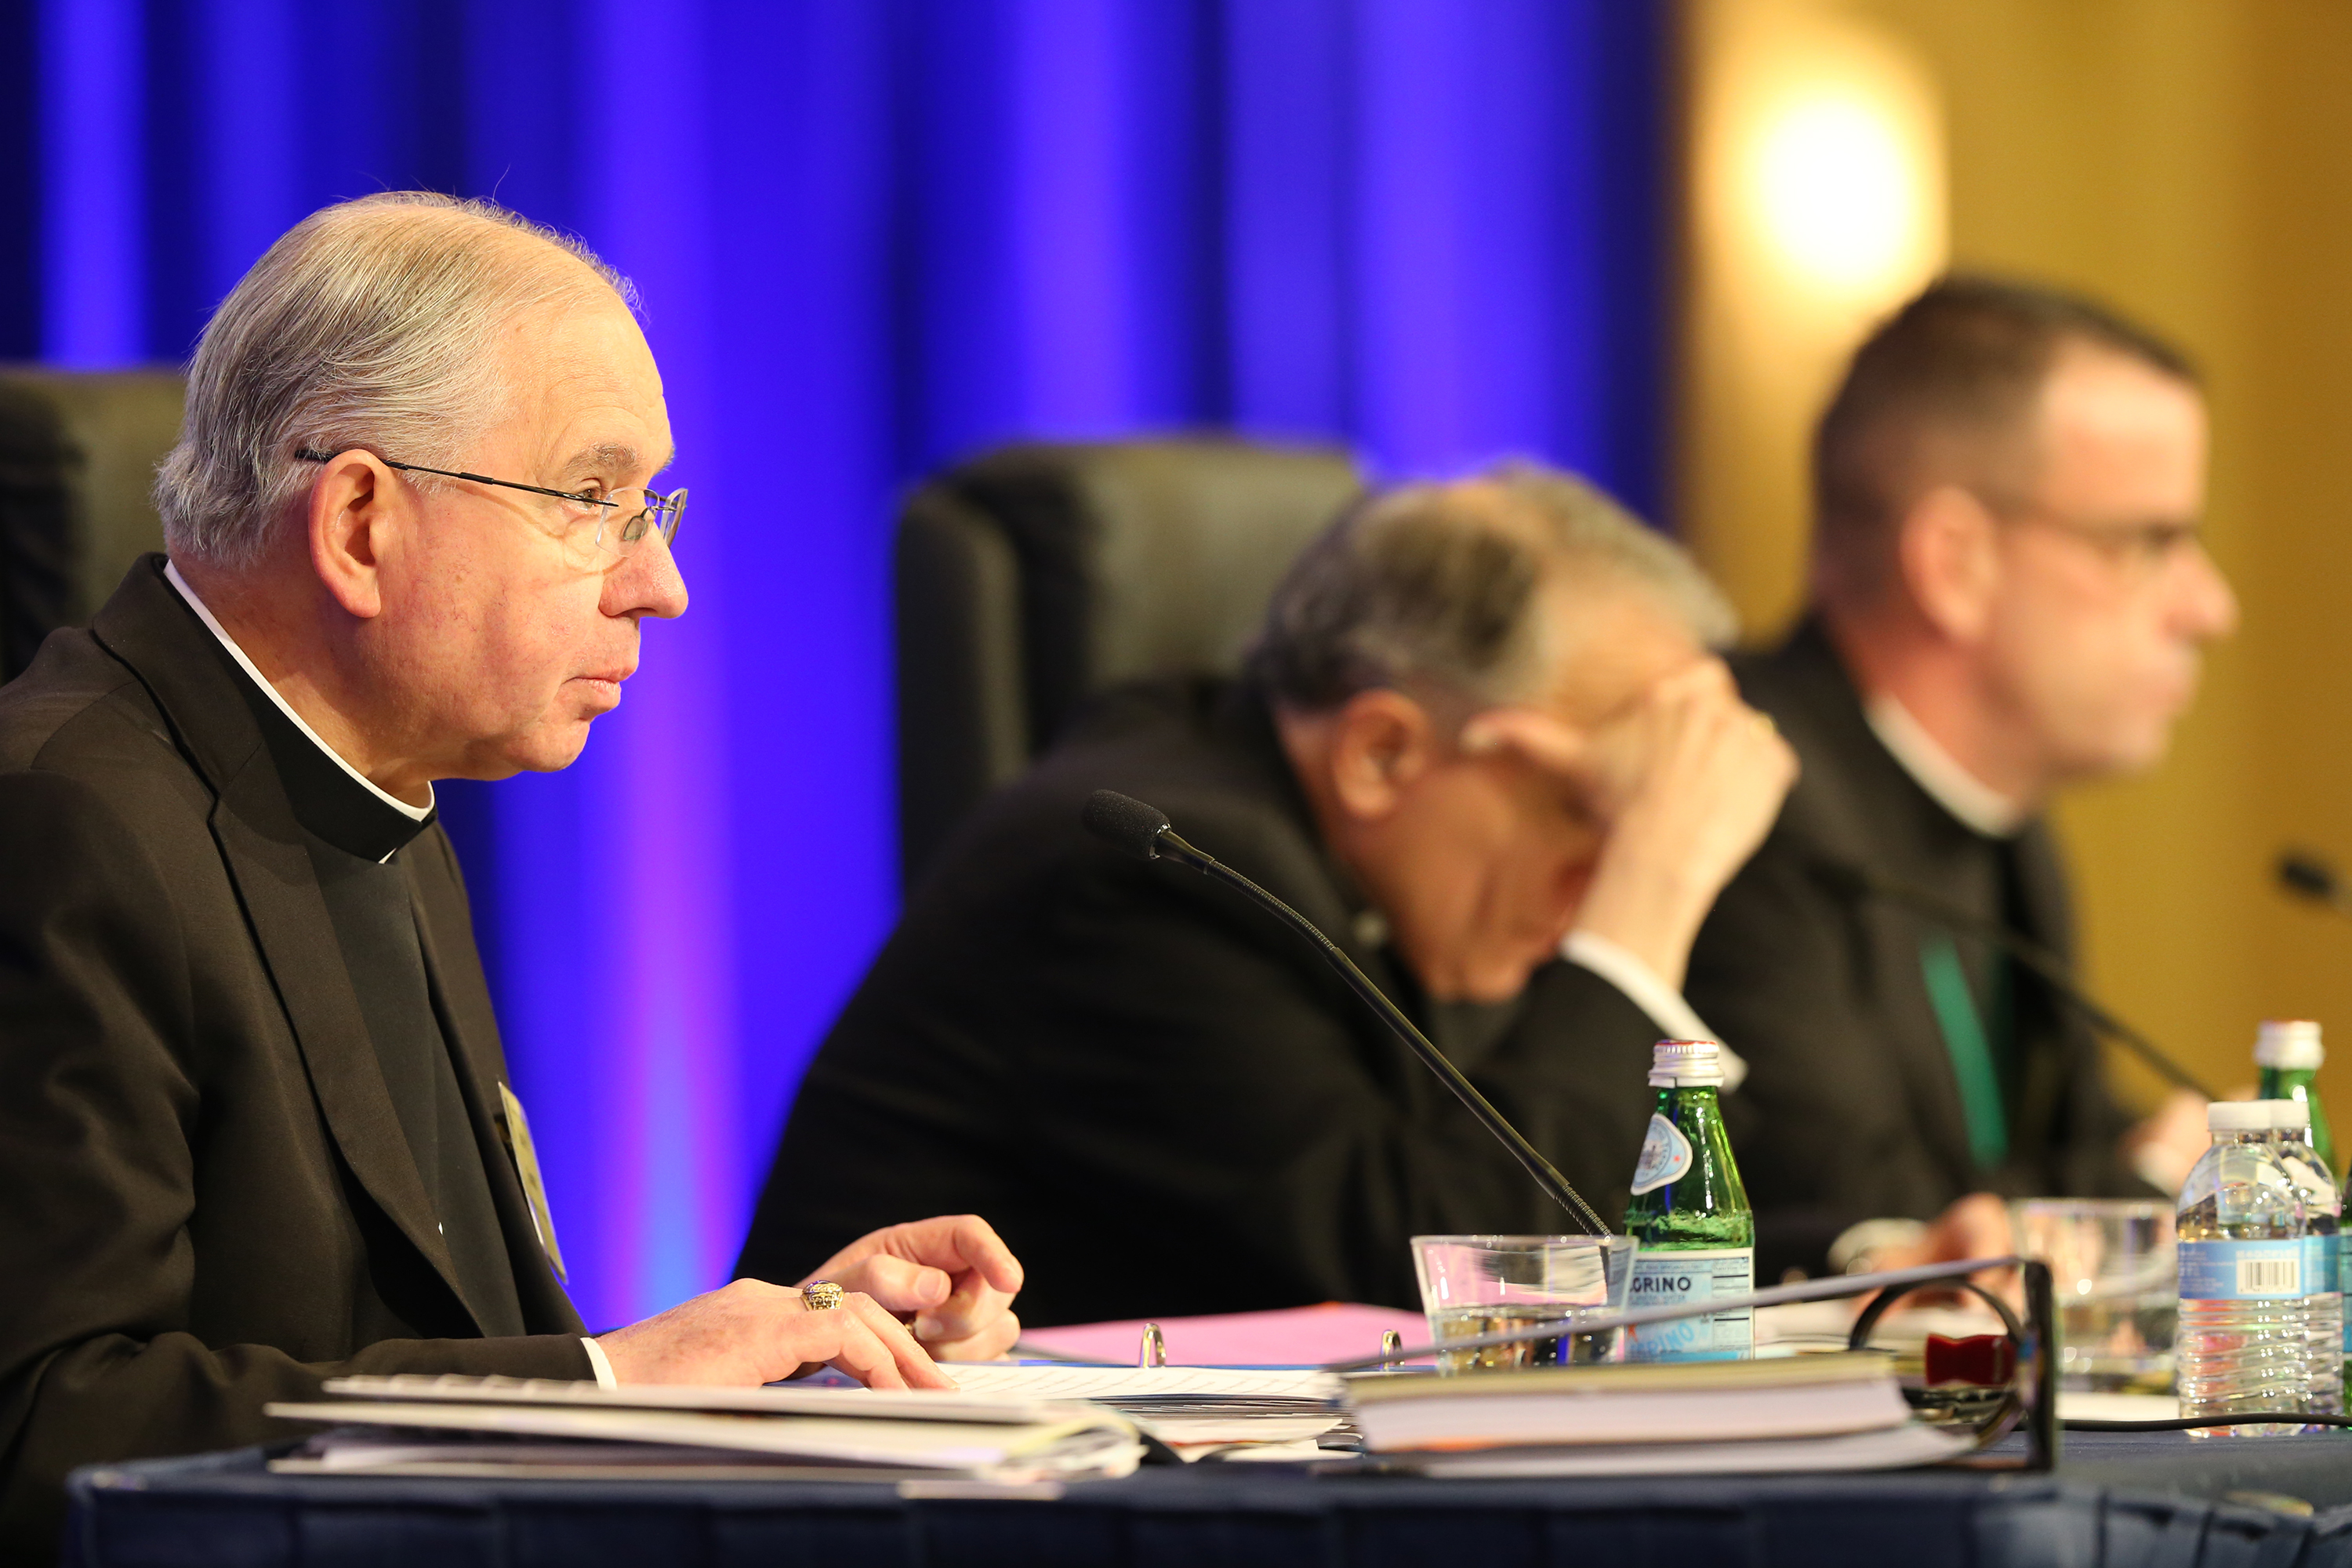 How US bishops plan to address the abuse crisis